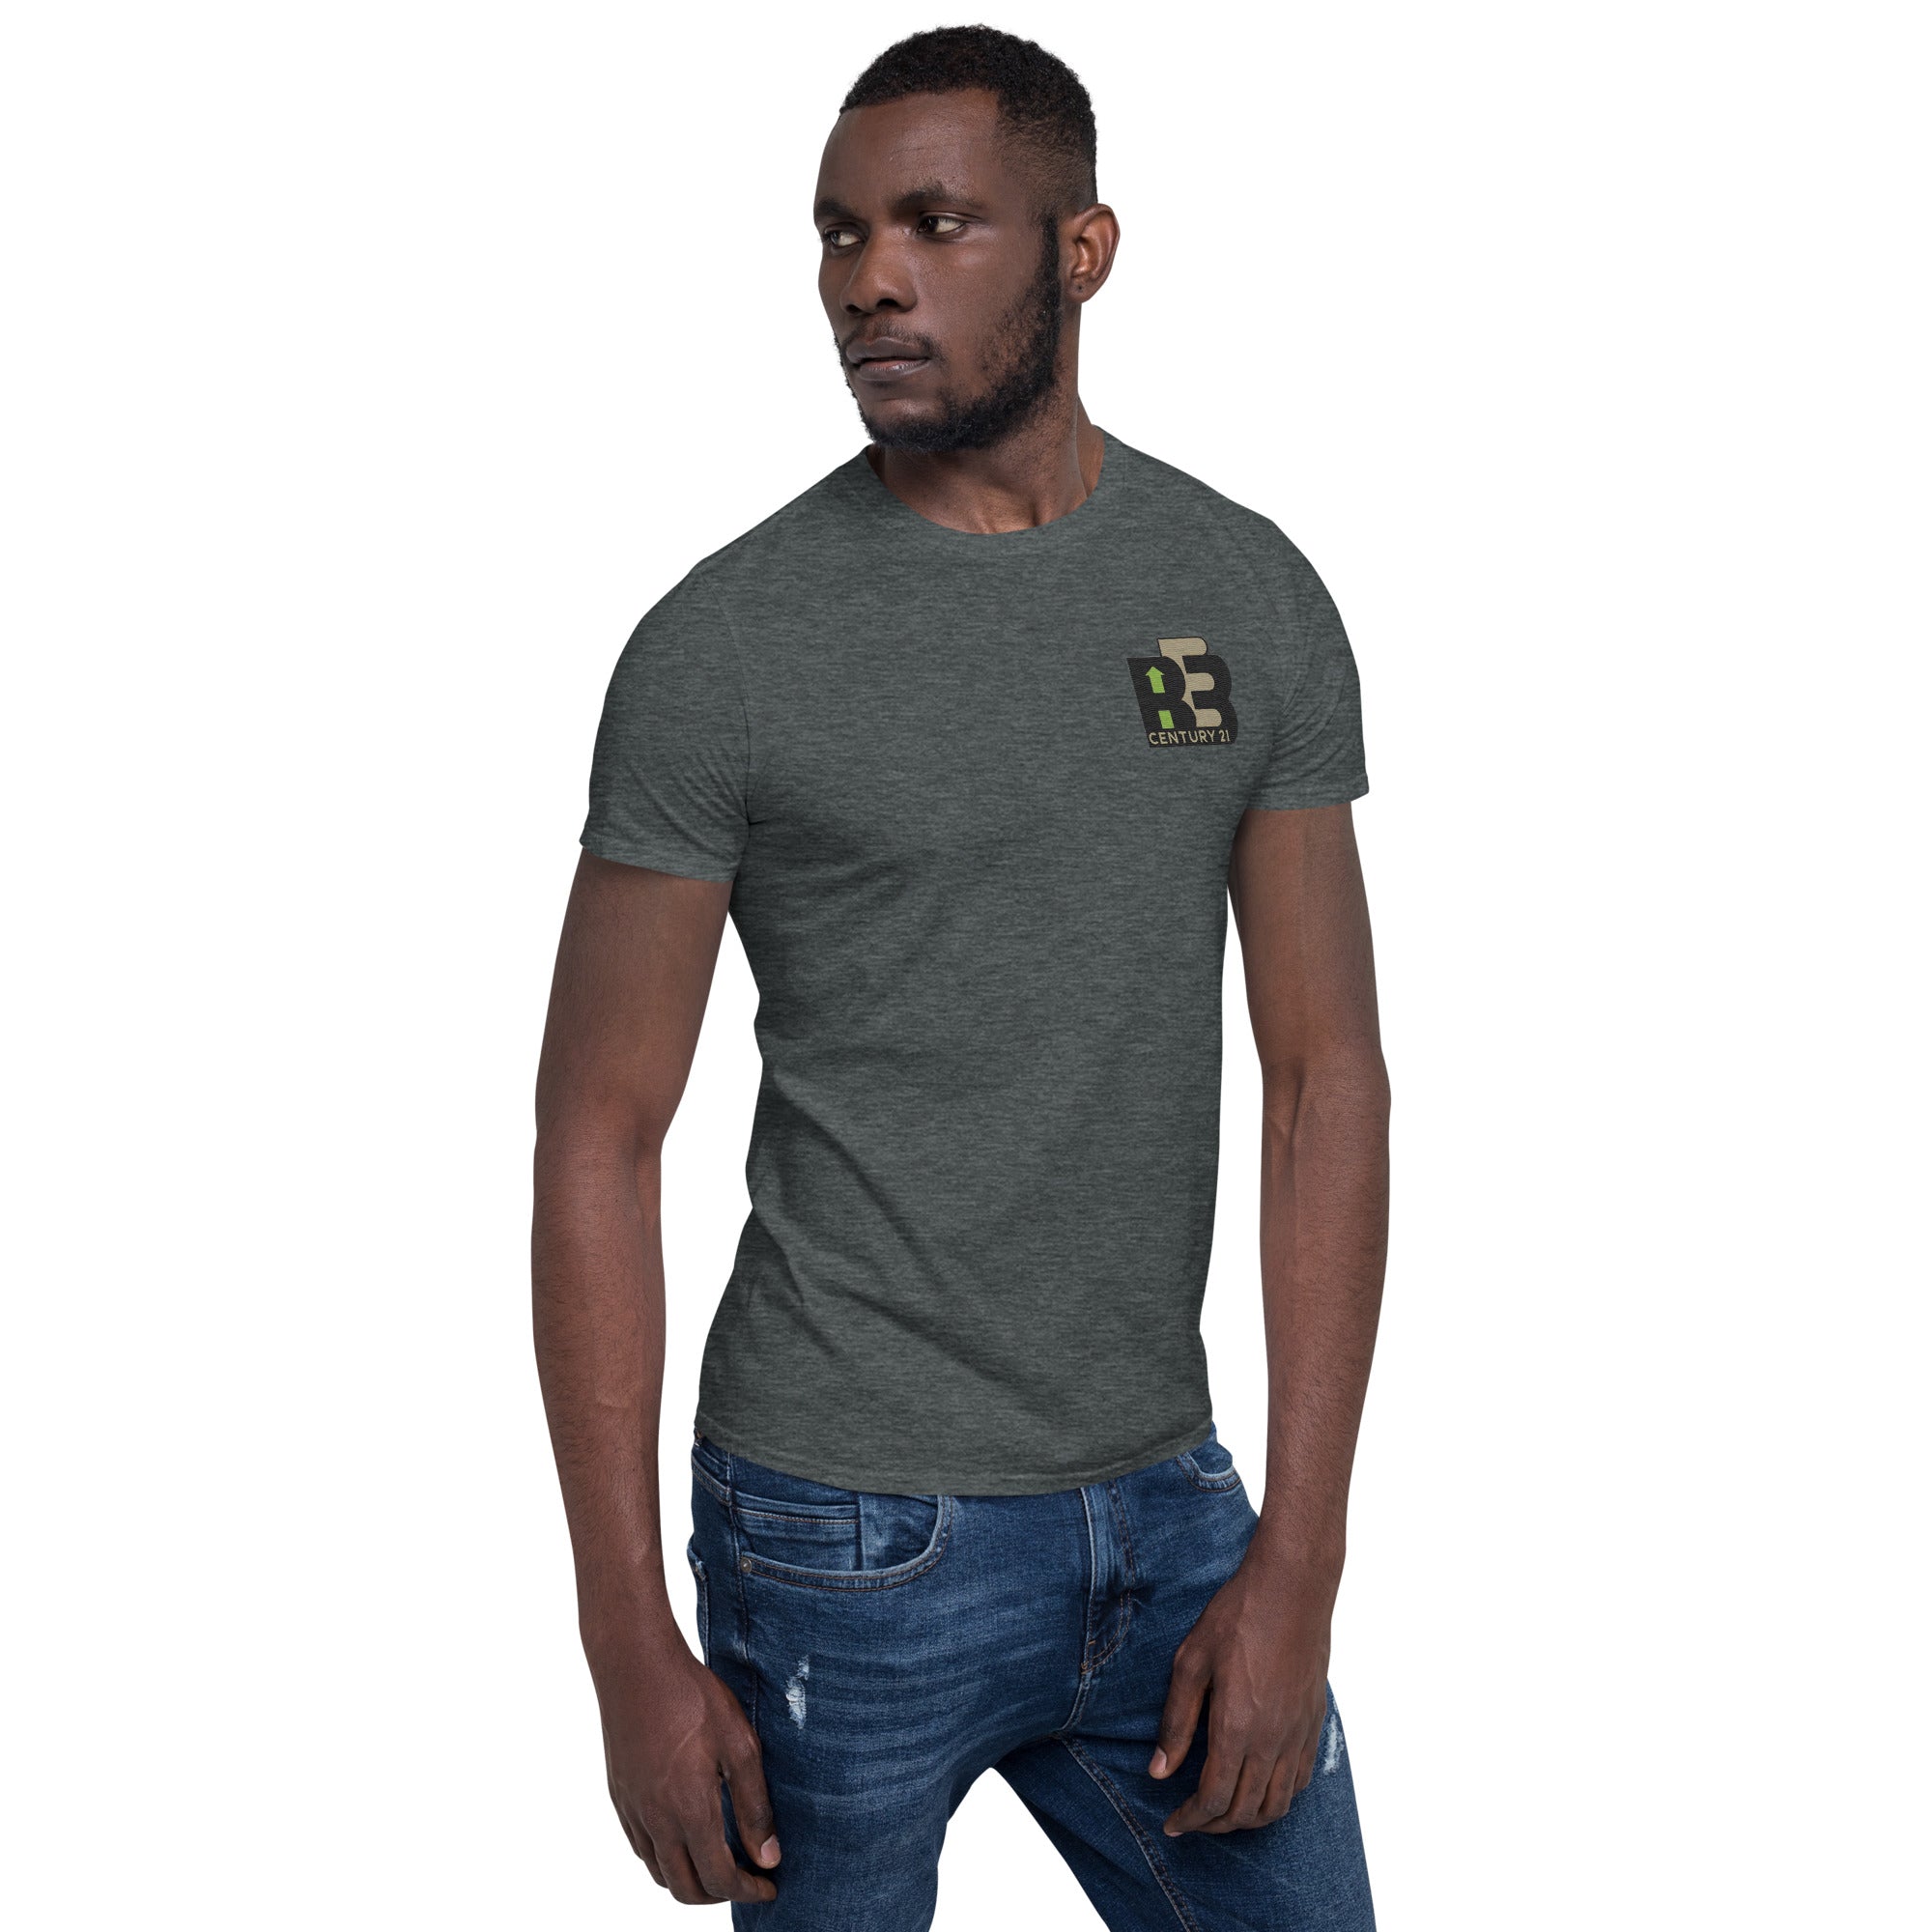 BE3 Embroidered Seal Short-Sleeve Men's T-Shirt